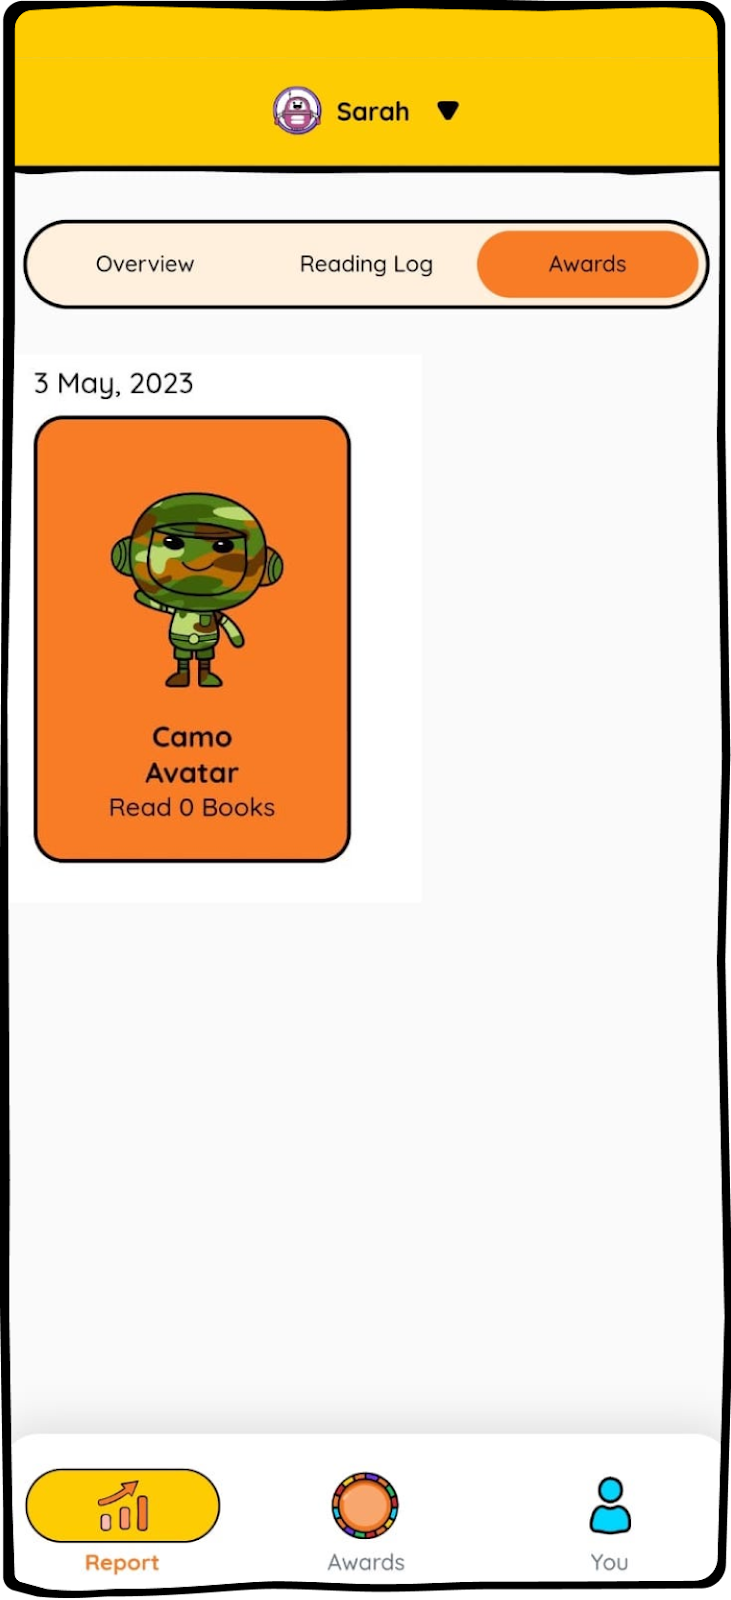 Display information about the avatars and awards